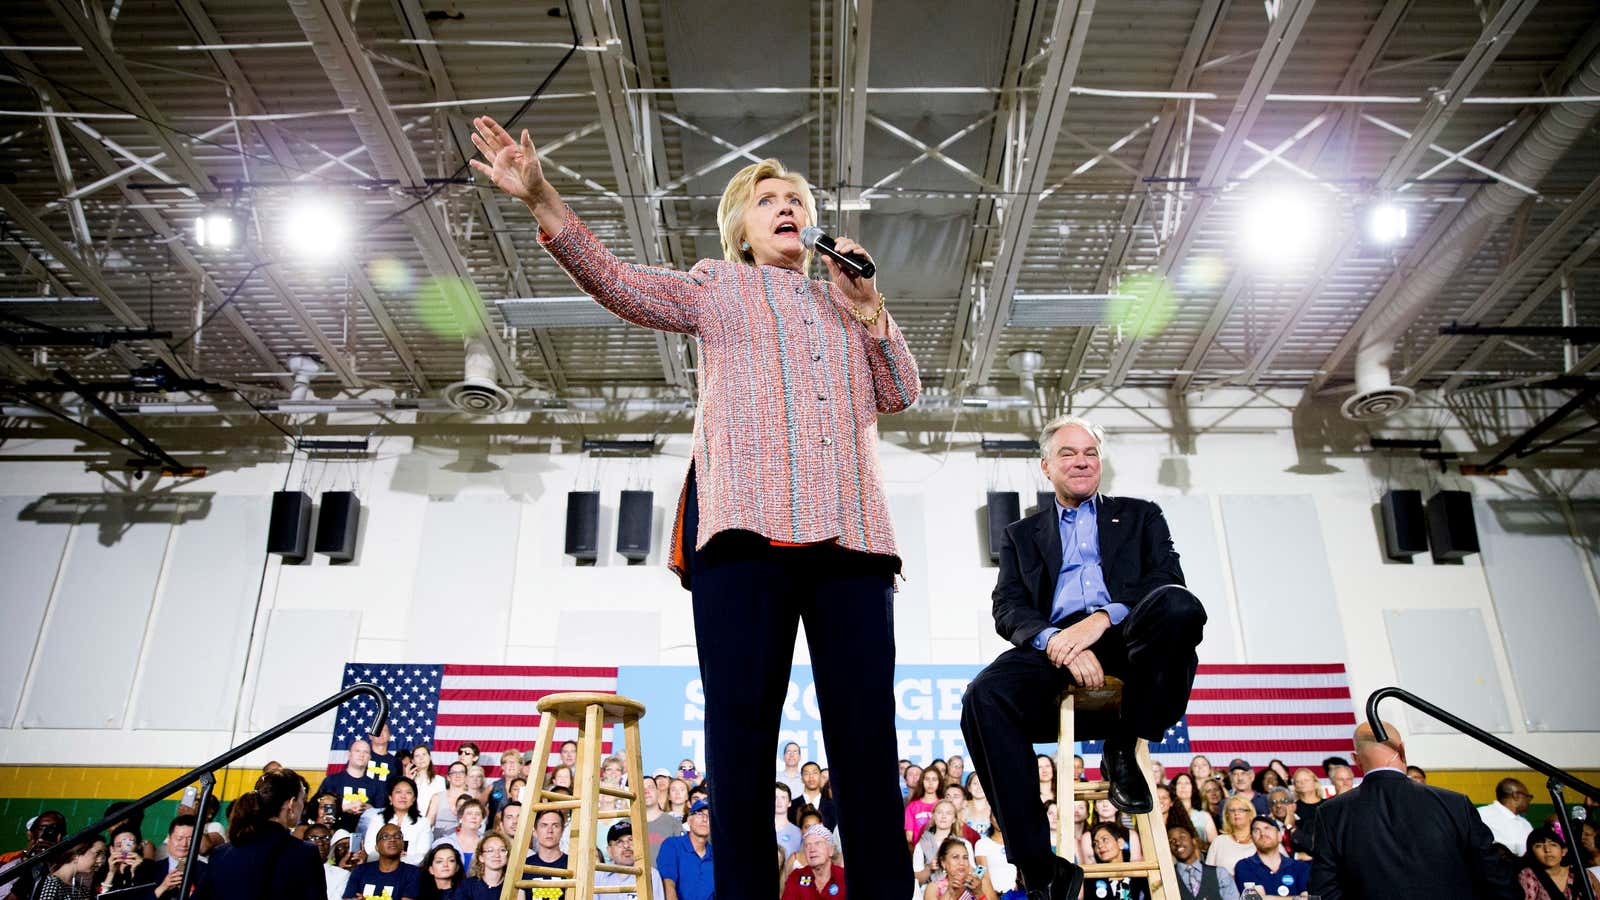 Democratic presidential candidate Hillary Clinton speaks at a rally in northern Virginia with possible vice presidential pick Tim Kaine.